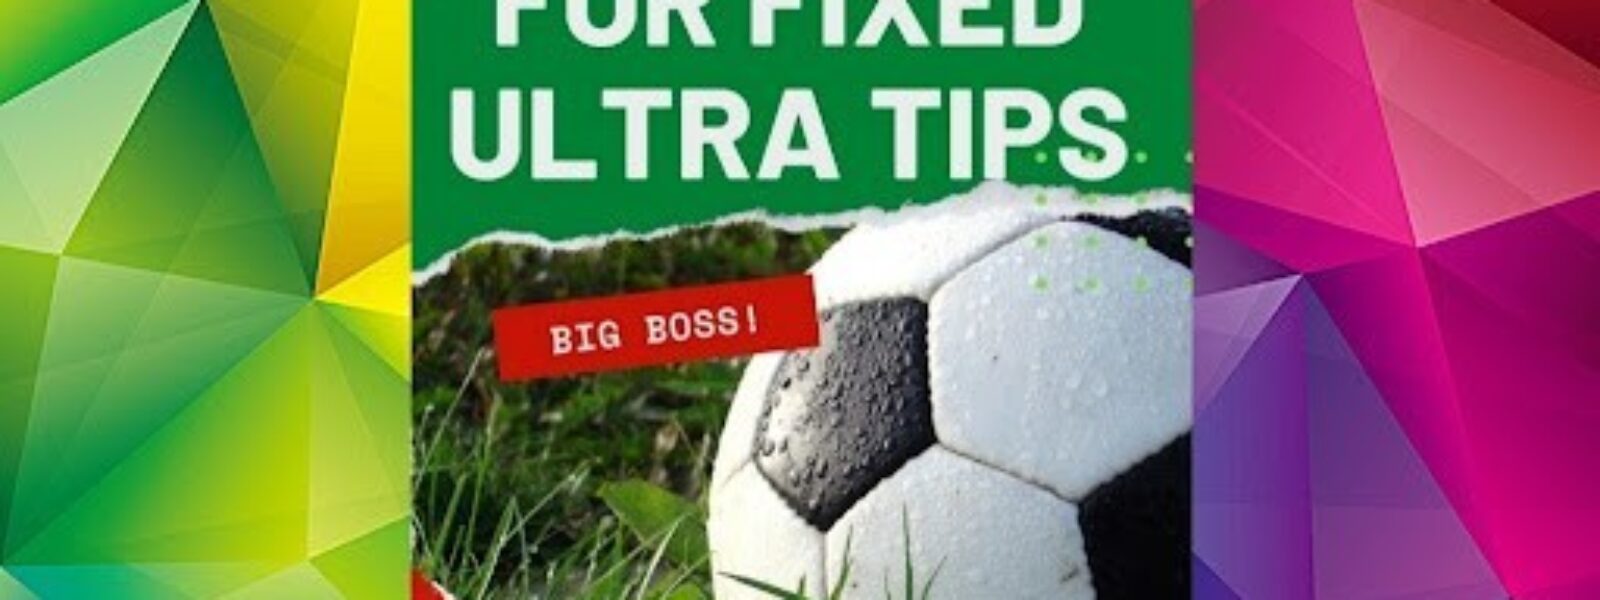 Ultra Fixed Betting Tips pentru Android | iOS